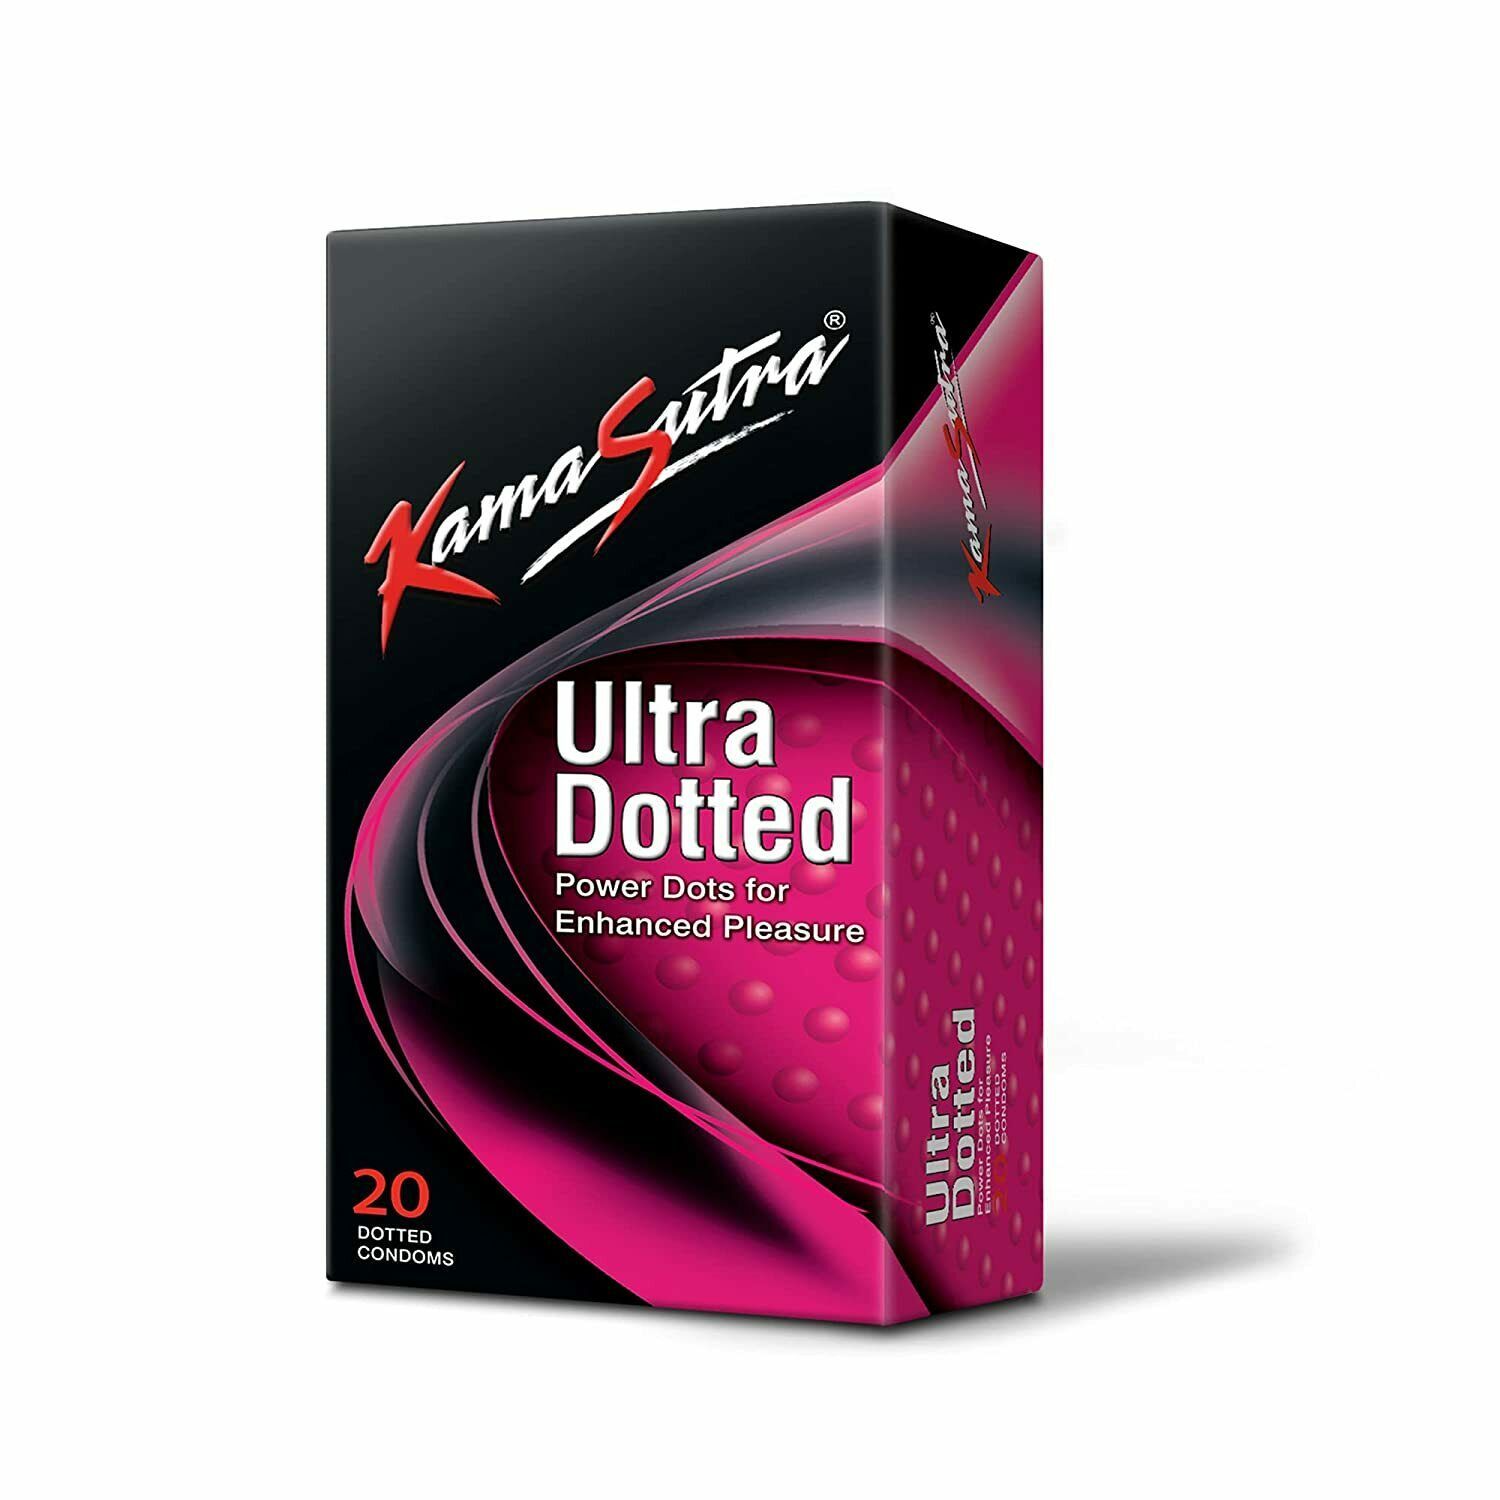 KamaSutra Ultra Dotted Condoms Pack of 20, Clear